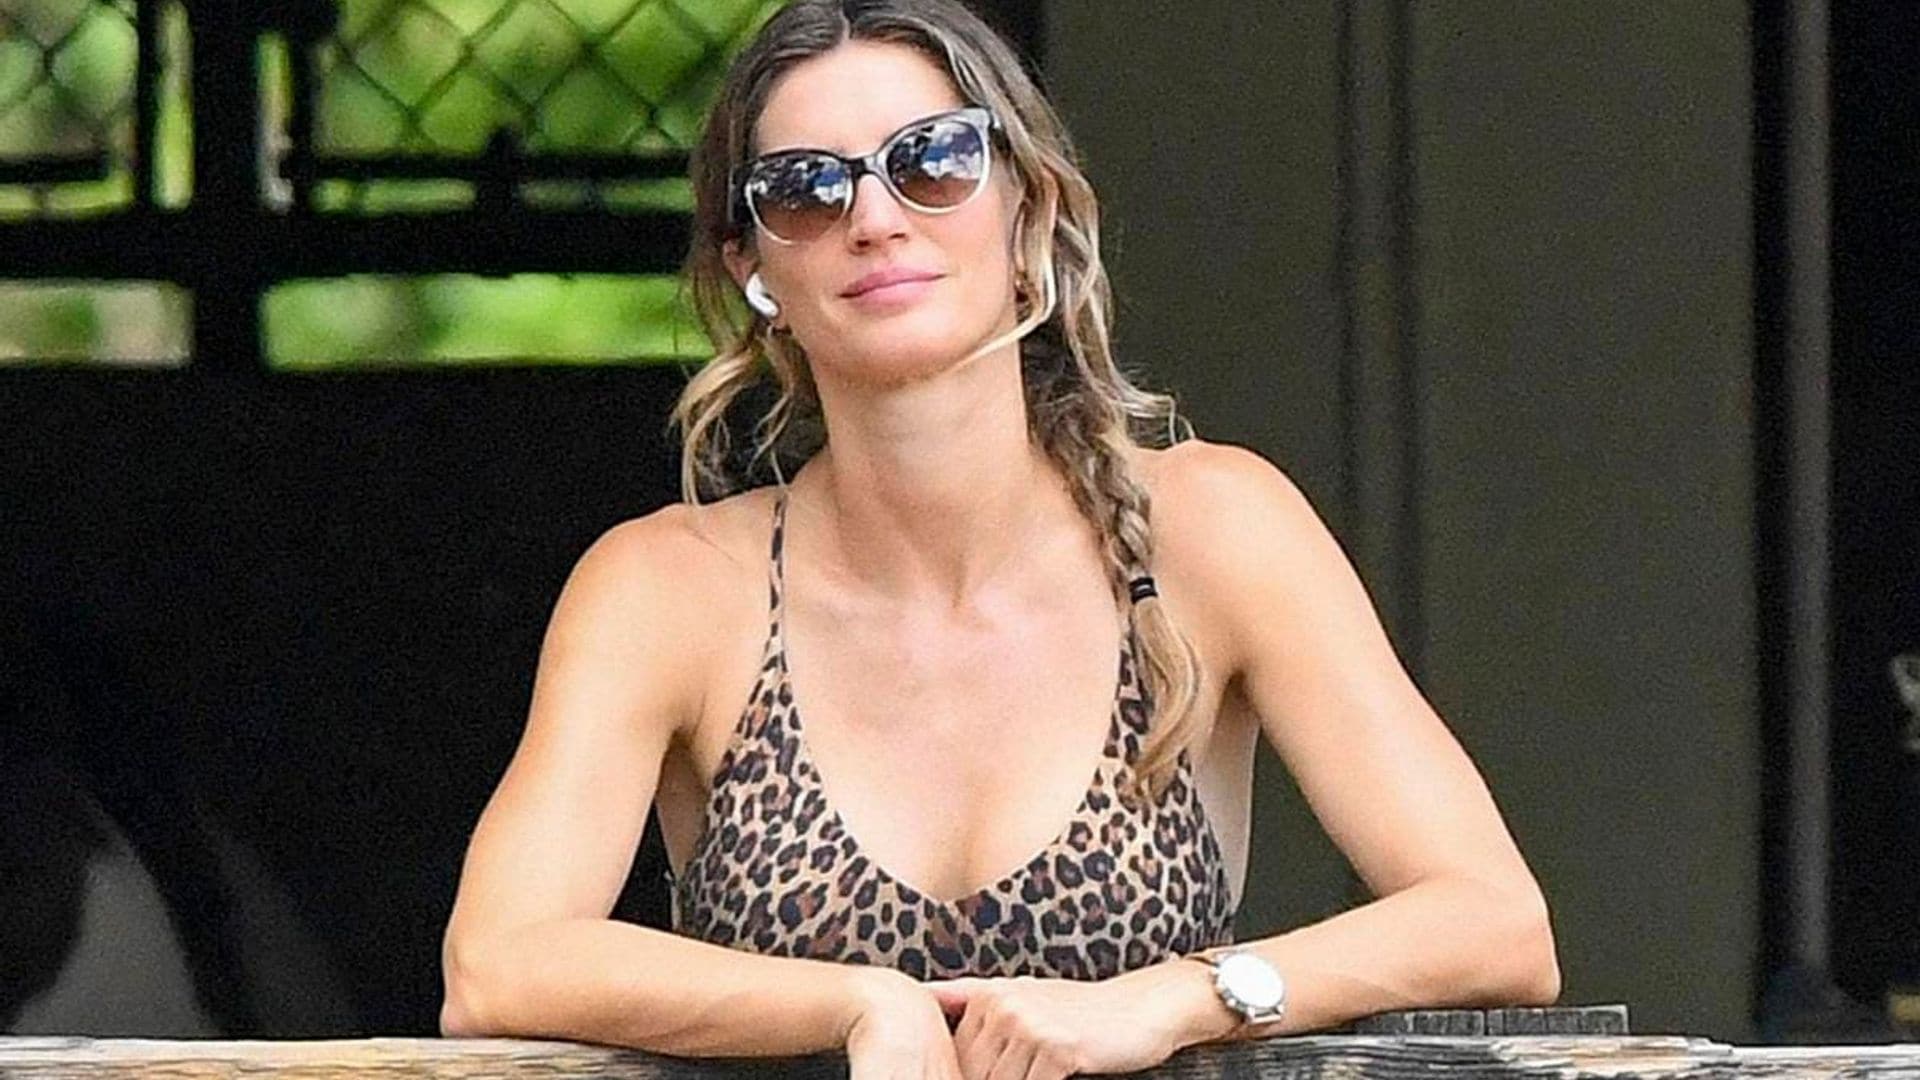 Gisele Bündchen wore animal-print swimsuit during recent outing with daughter Vivian